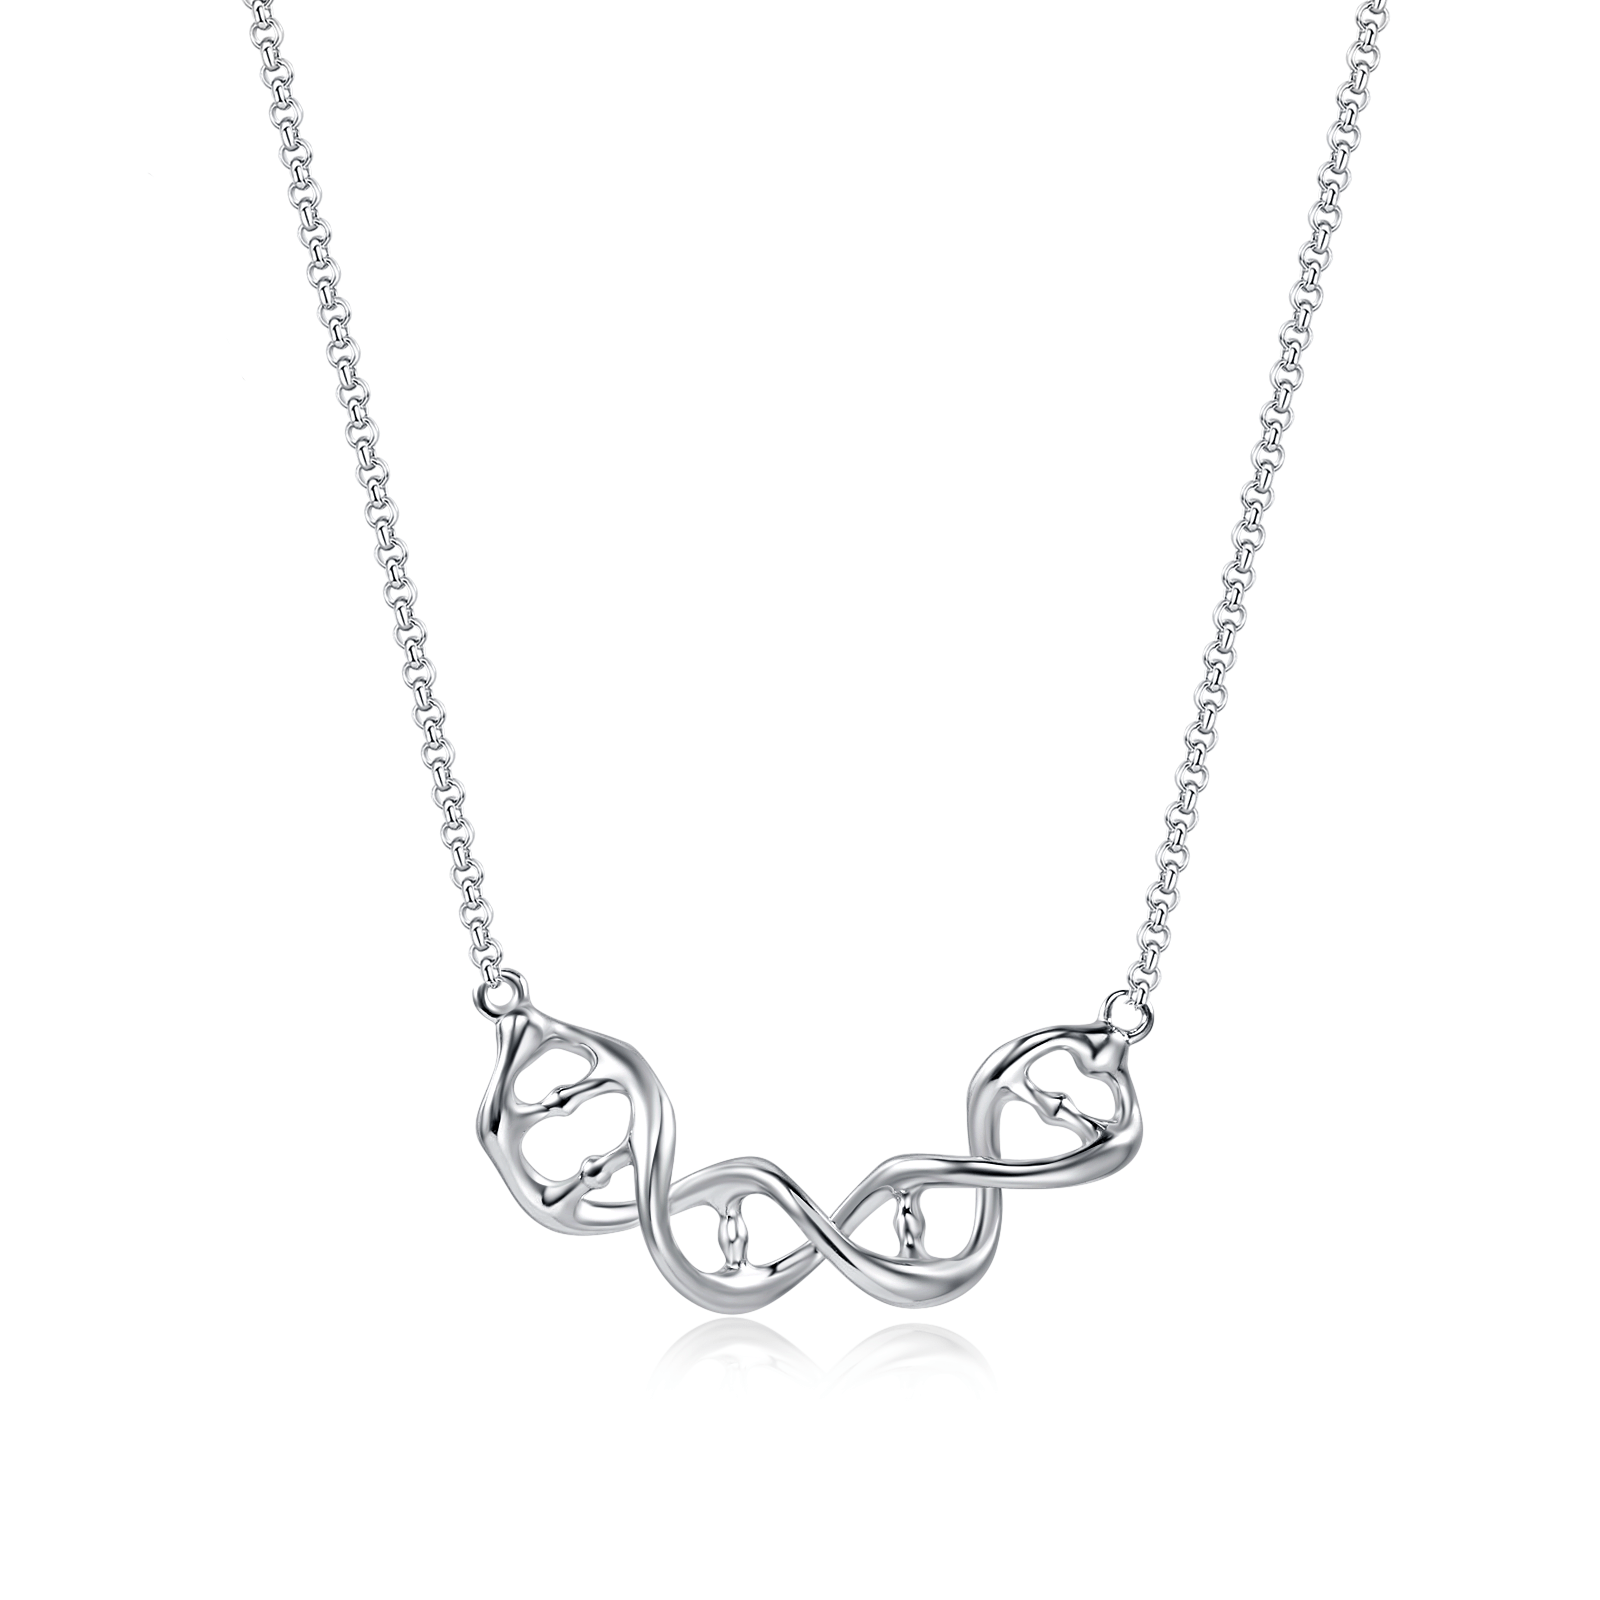 FANCIME "Genetic Soulmate" DNA 925 Sterling Silver Necklace Main